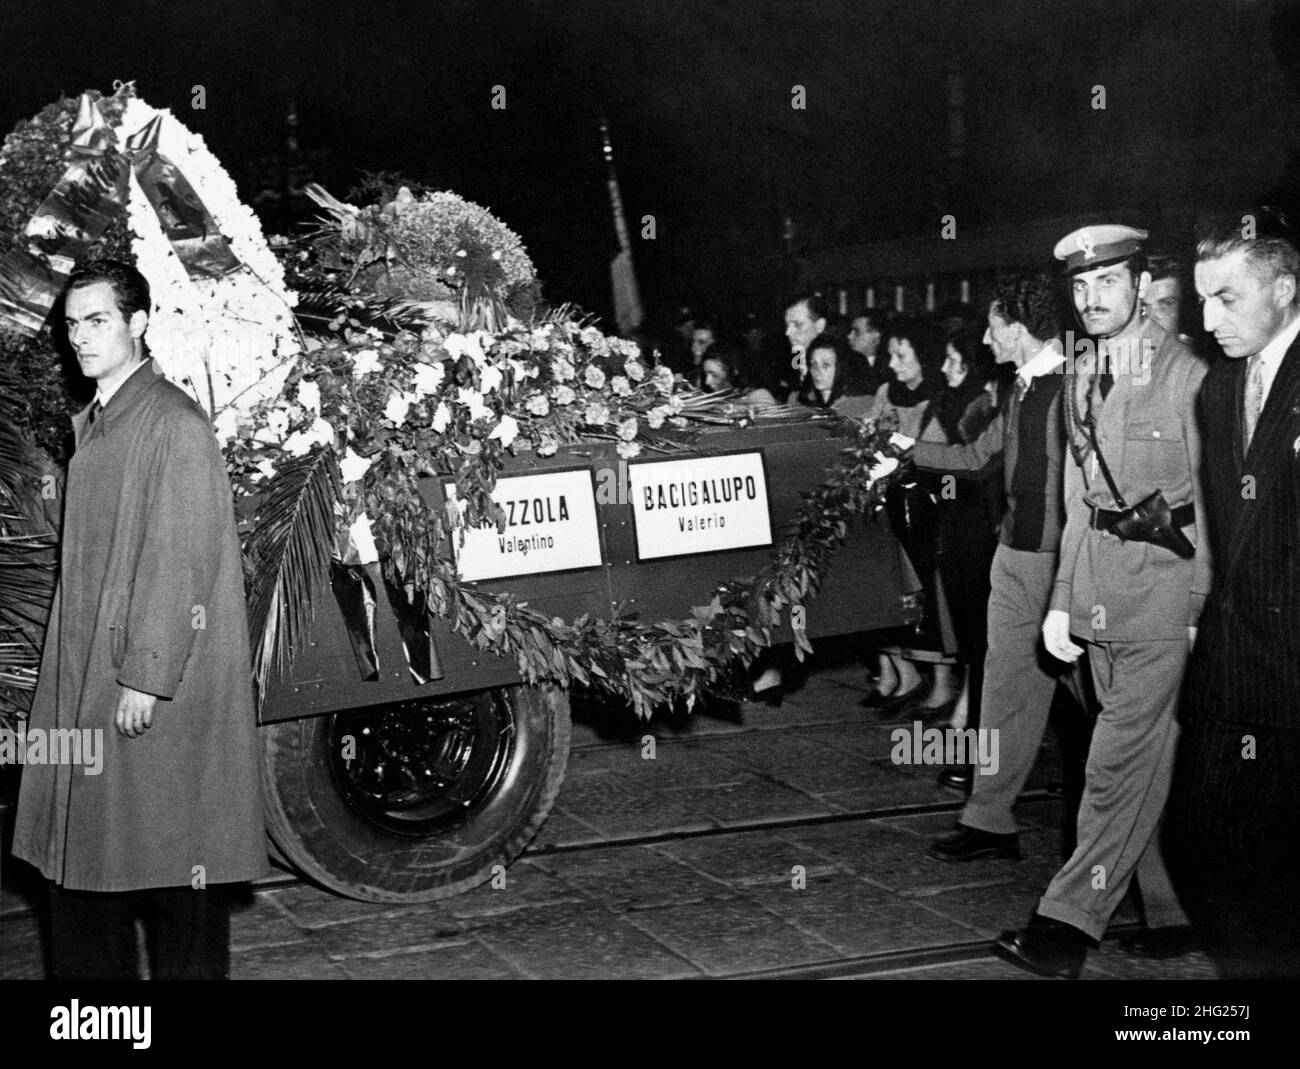 The funeral procession of victims from the Superga Air Disaster which included the Torino A.C. football squad, popularly known as Il Grande Torino.  The coffins of Mazzola and Bacigalupo are pictured. Stock Photo